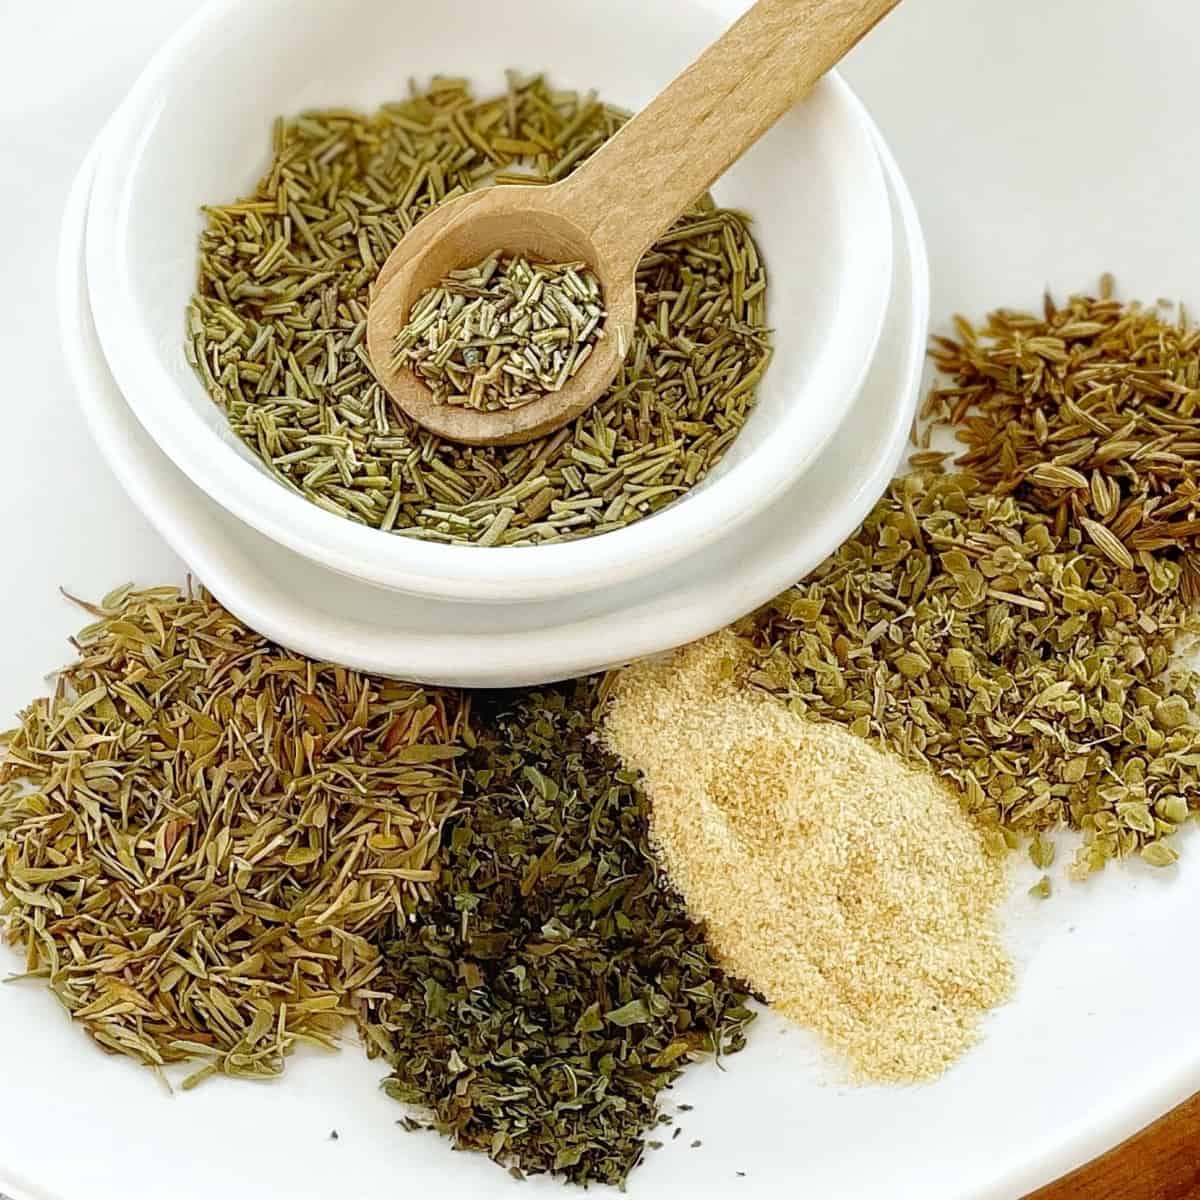 small piles of dried herbs on a white plate with a small wooden spoon.